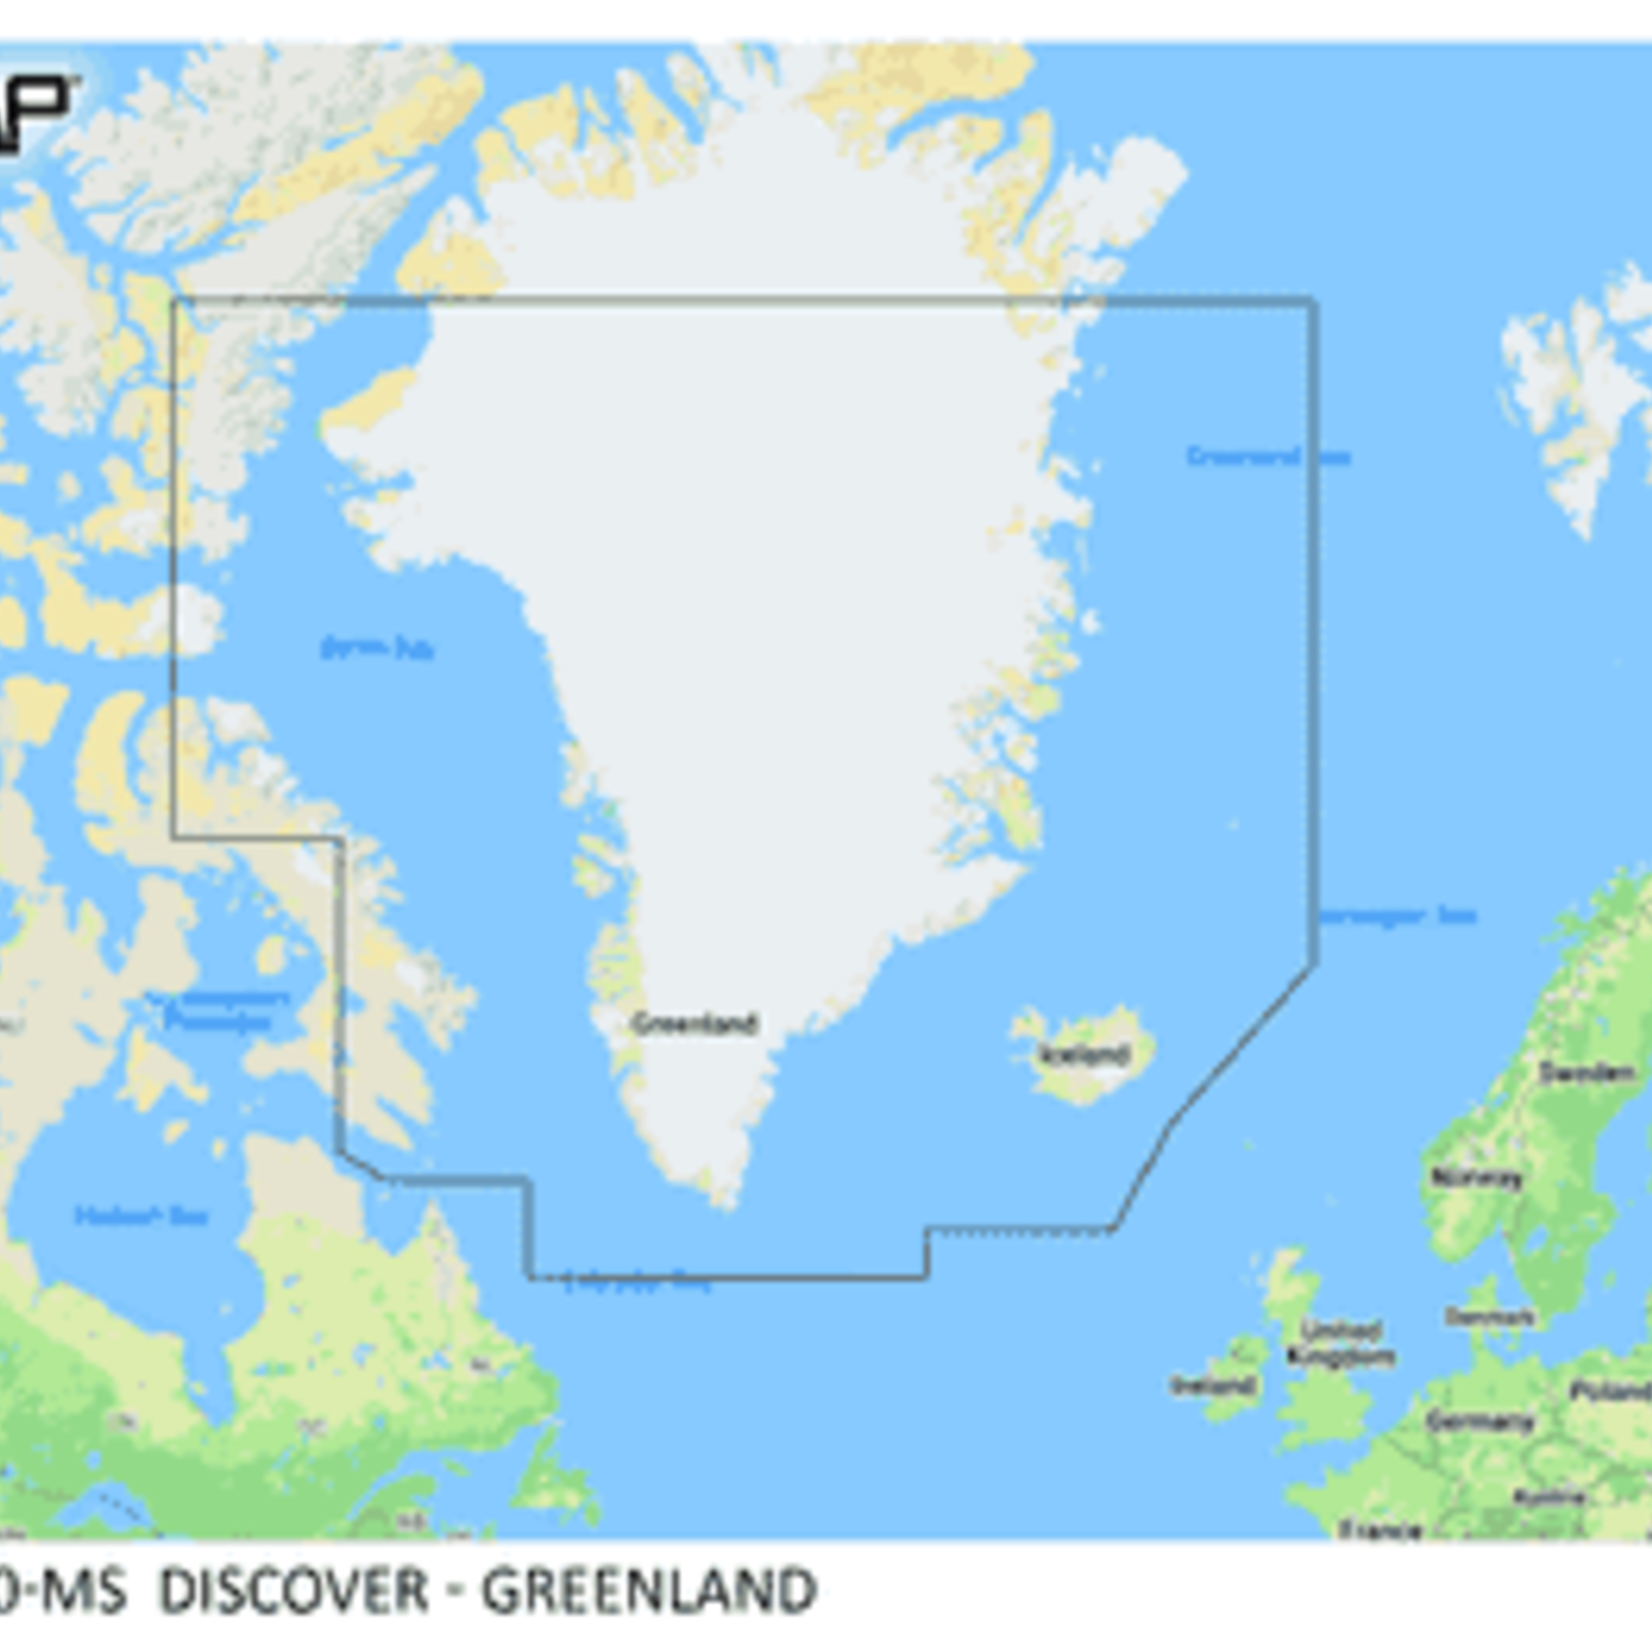 C-MAP DISCOVER - Greenland